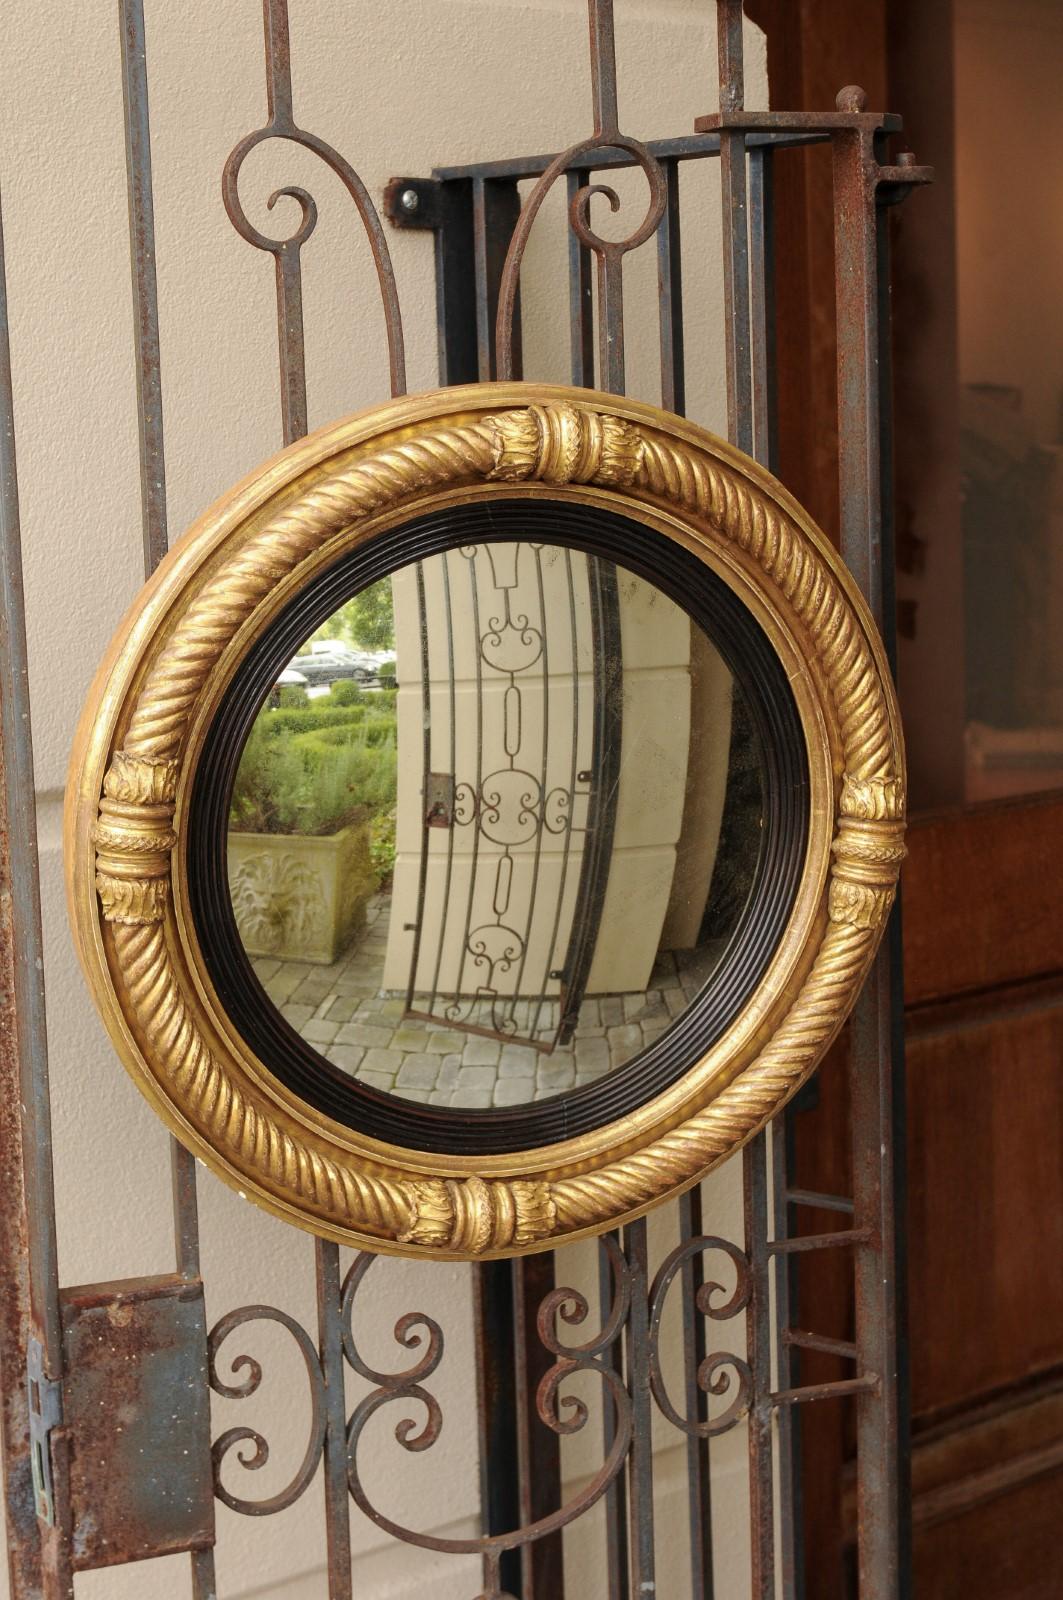 An English Georgian period giltwood convex mirror from the early 19th century, with ebonized accents and twisted rope motifs. This exquisite English mirror features a convex mirror plate, surrounded by an inner ebonized molded frame. The outer frame